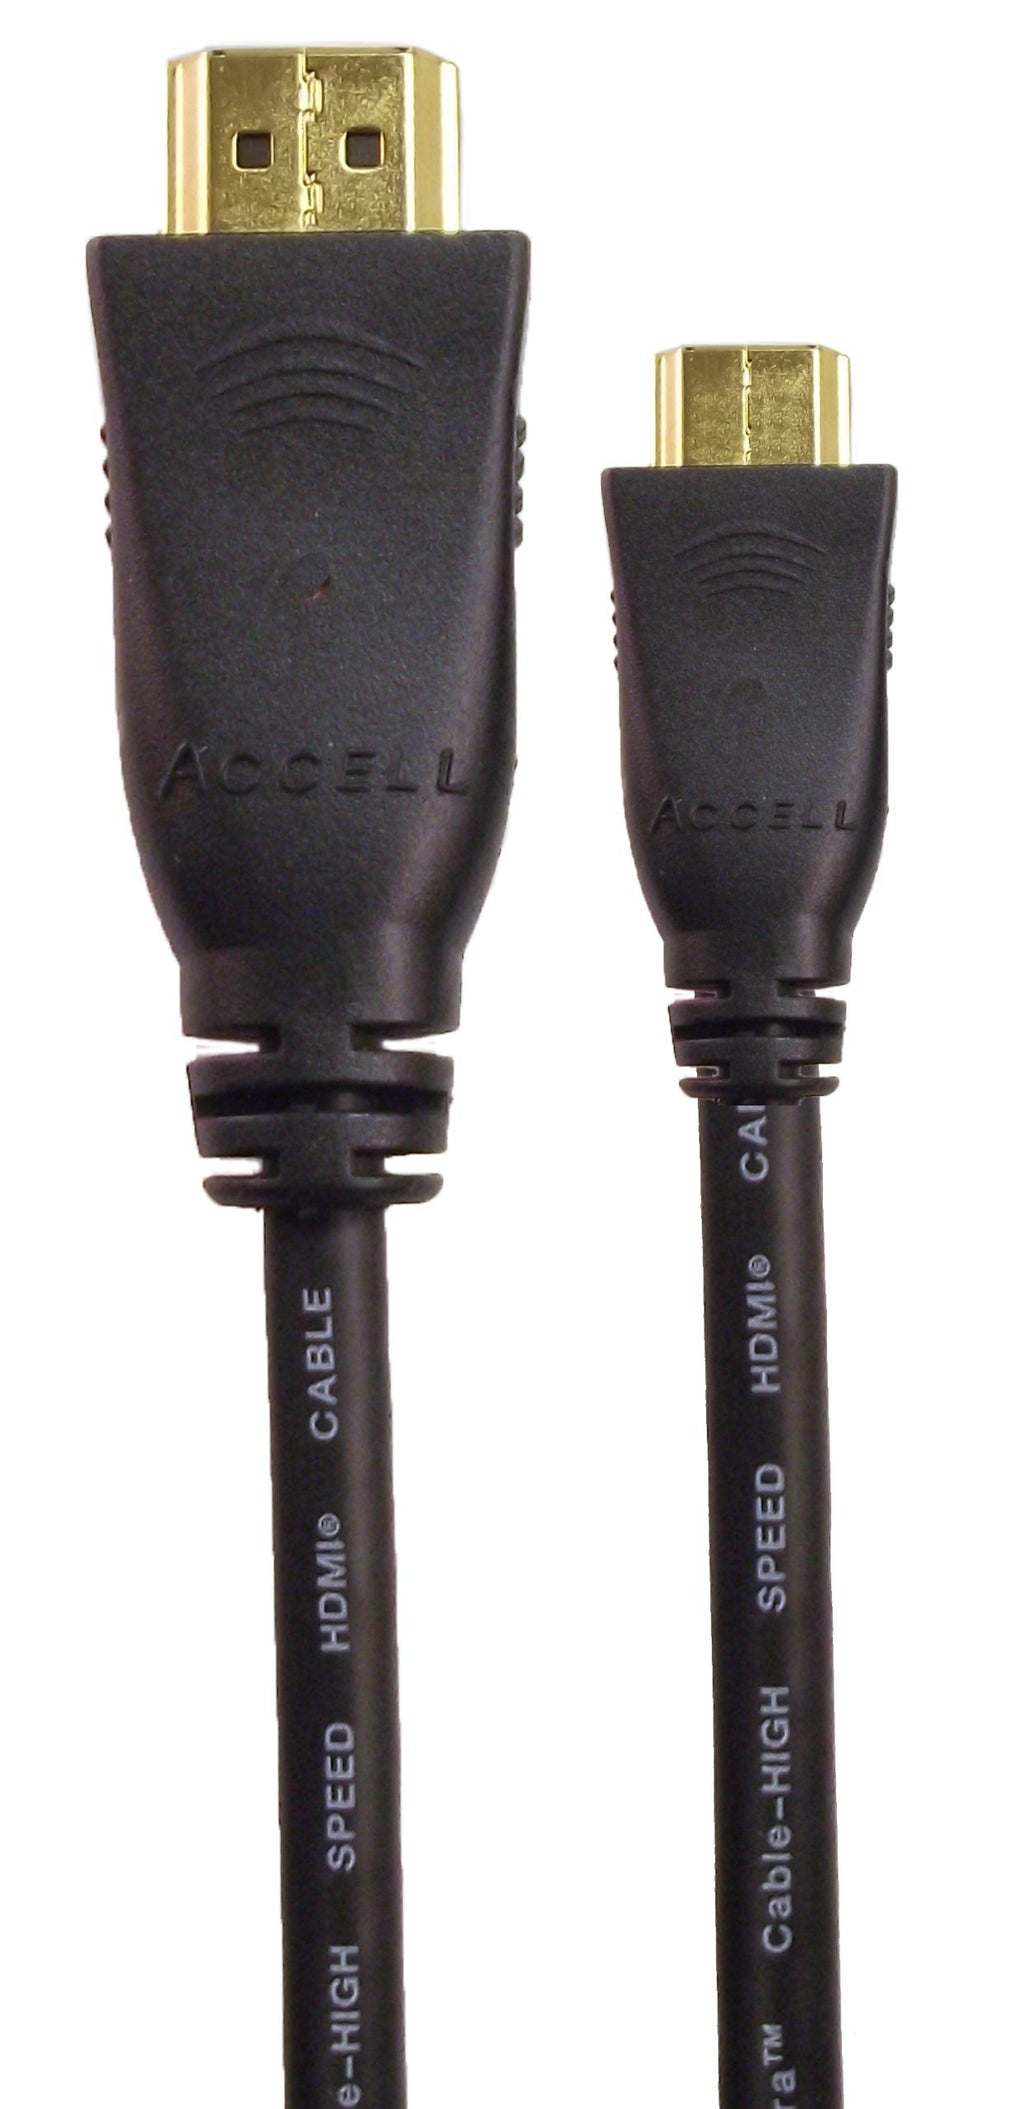 Accell A075C-006B Ultrathin HDMI to Mini HDMI cable 6ft/1.5m for Archos 70, Archos 101, ExoPC Slate, T-mobile 9LG) G-Slate, Nokia N8, Nokia E7